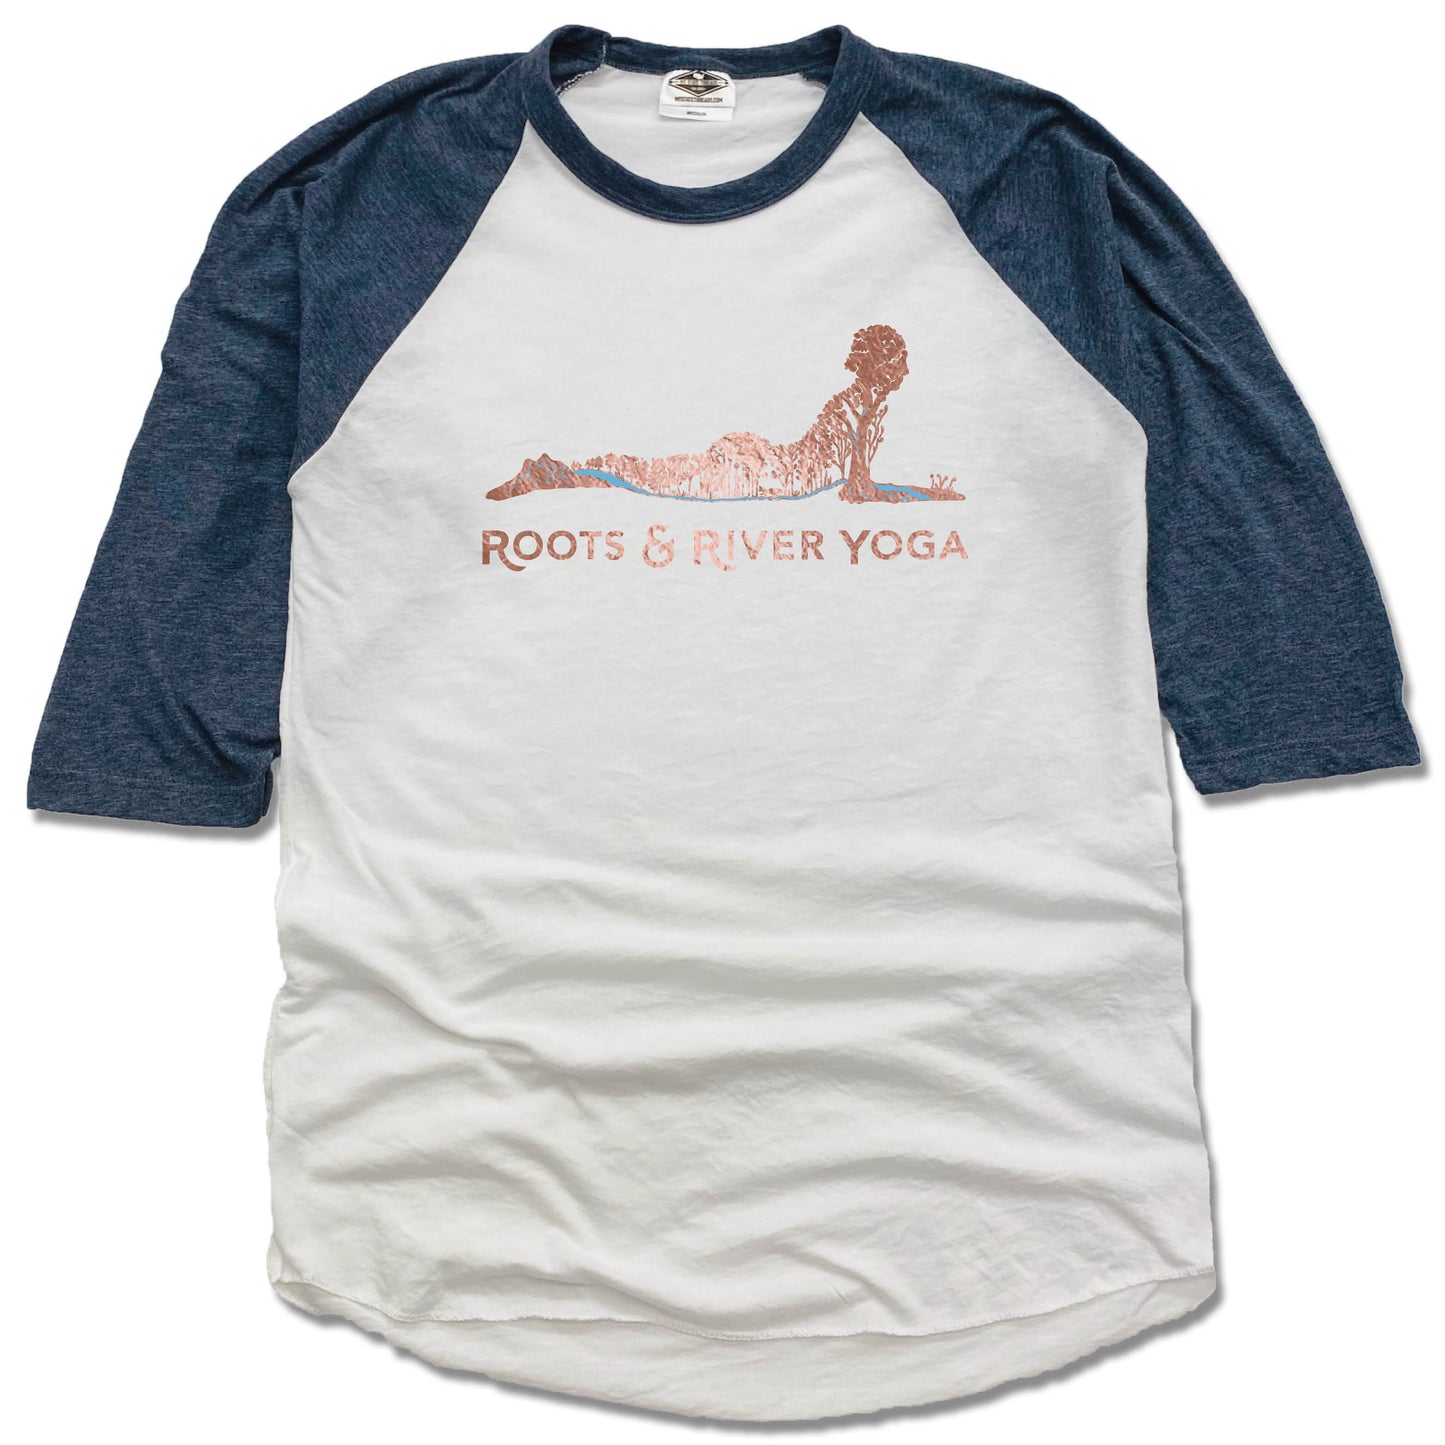 ROOTS & RIVER YOGA | NAVY 3/4 SLEEVE | ROSE GOLD LOGO